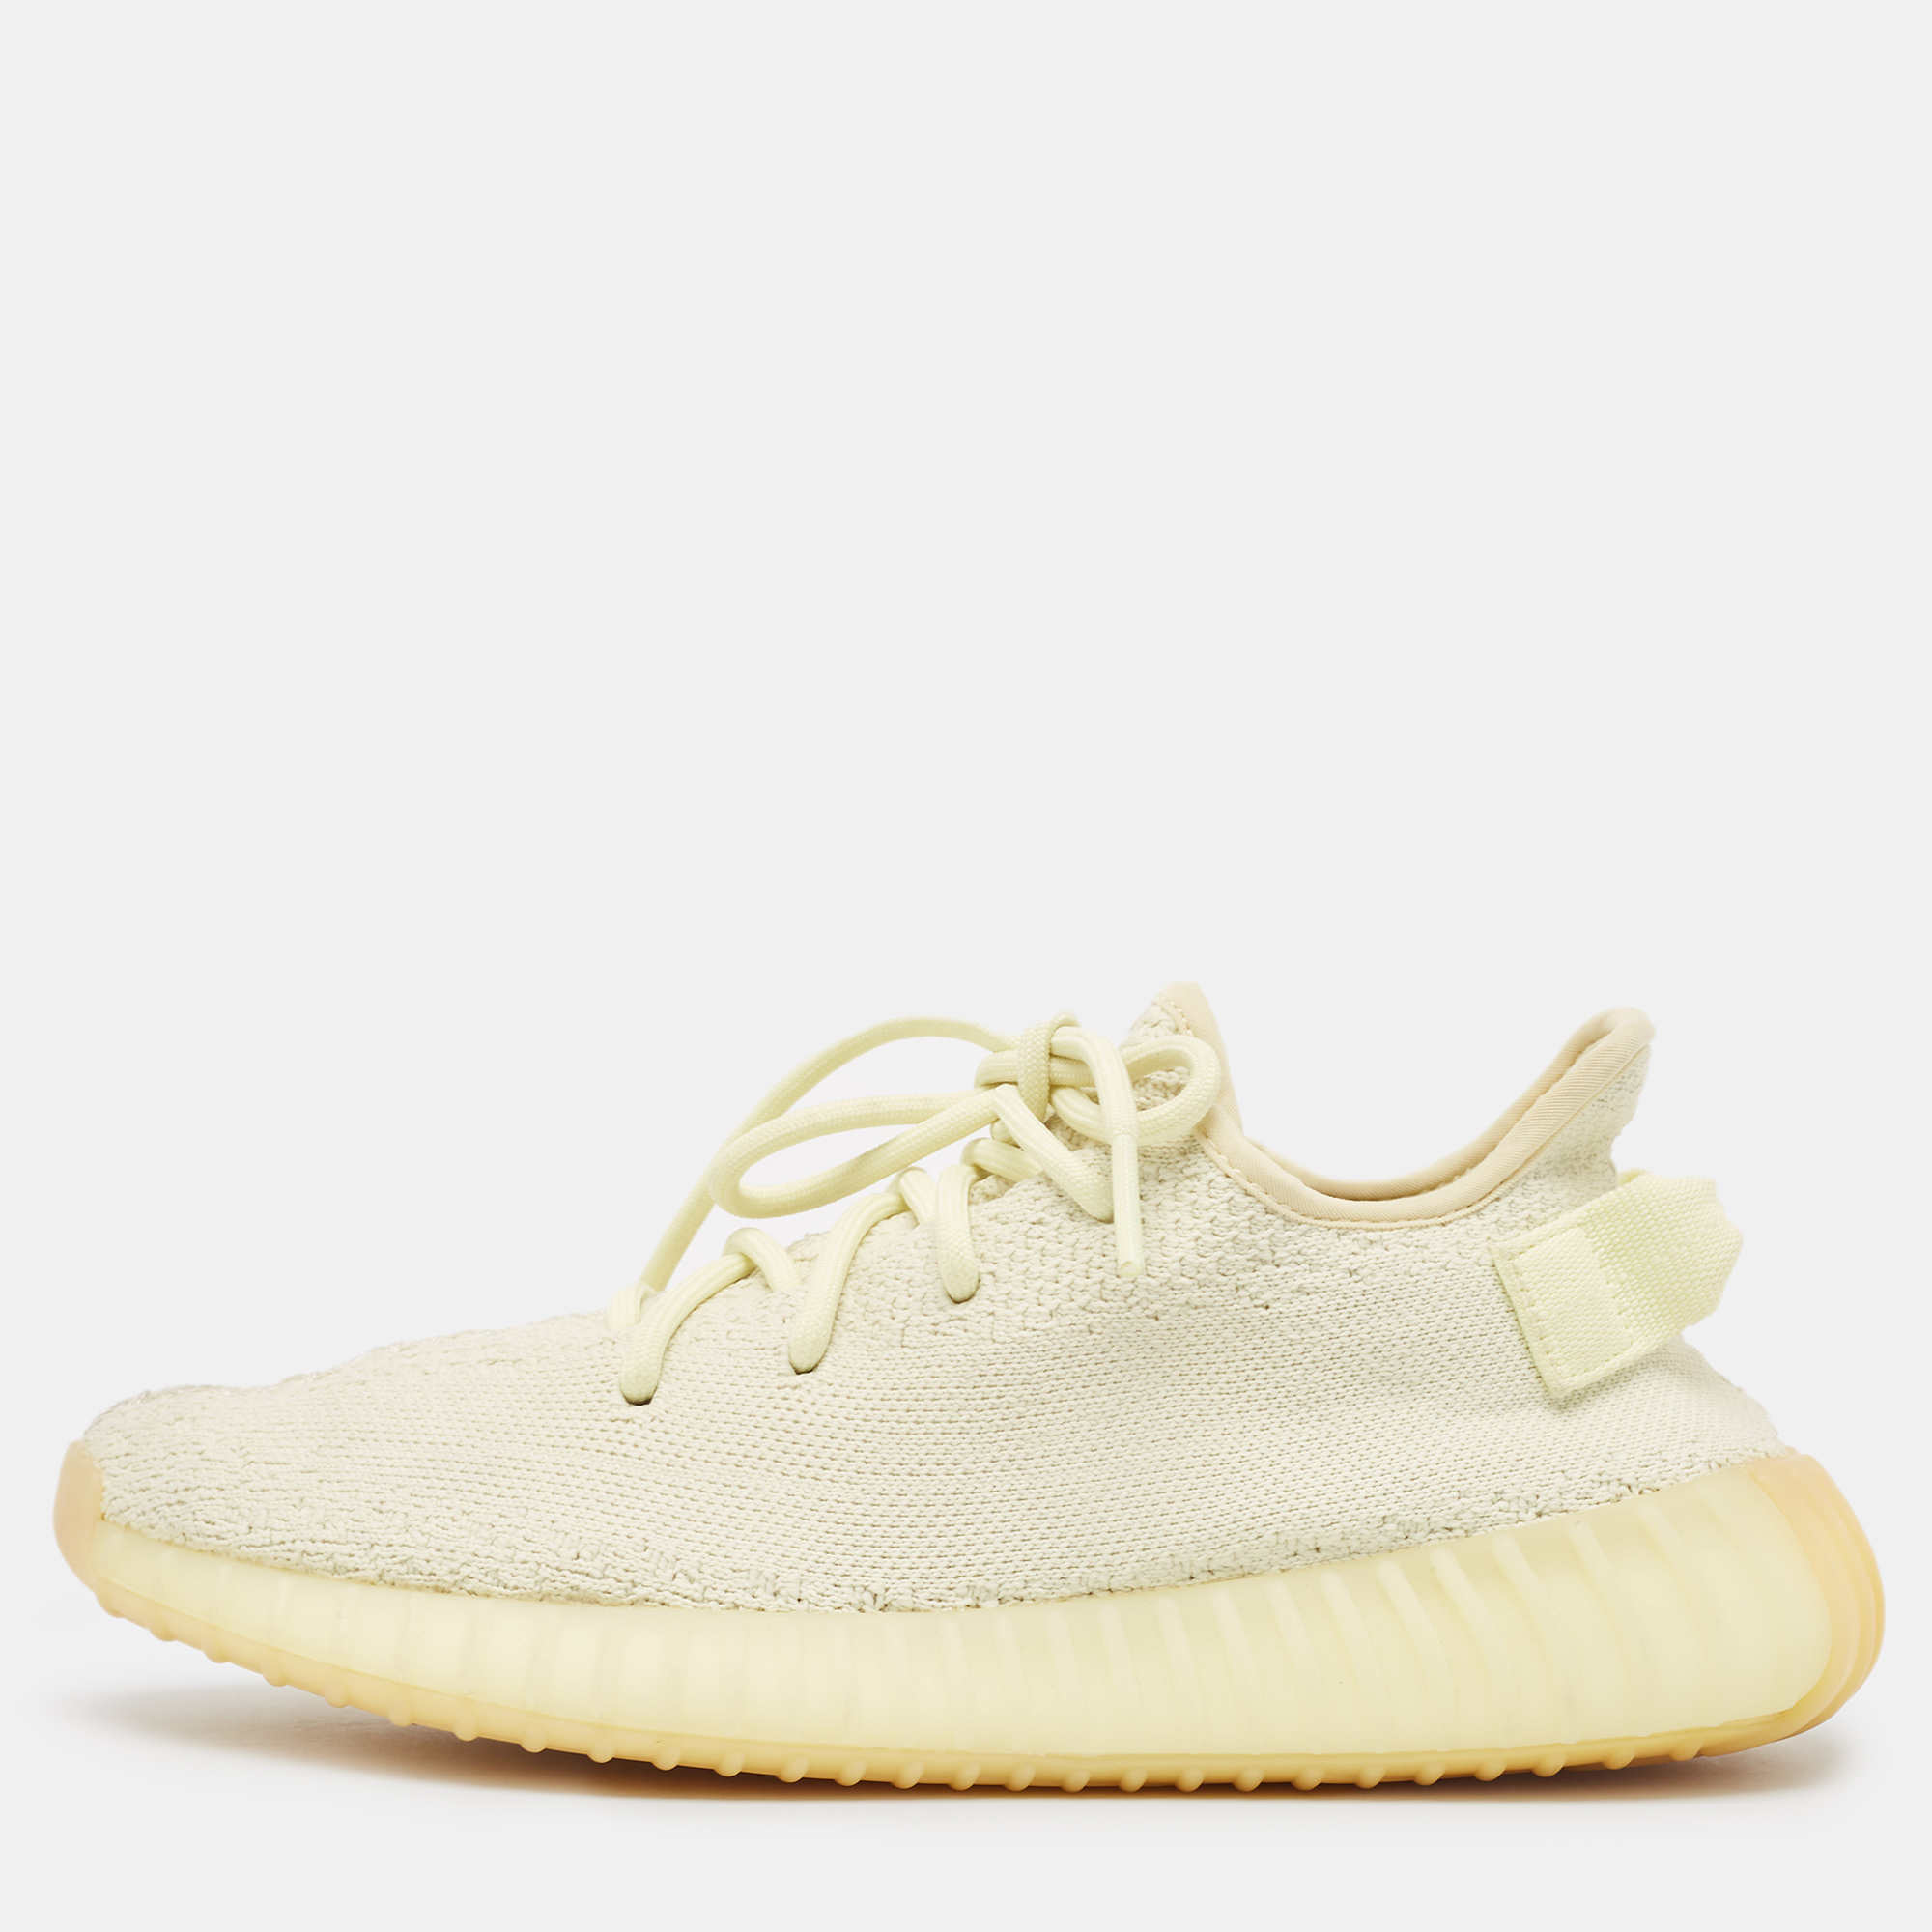 Yeezy x adidas cream knit fabric boost 350 v2 butter sneakers size 39 1/3